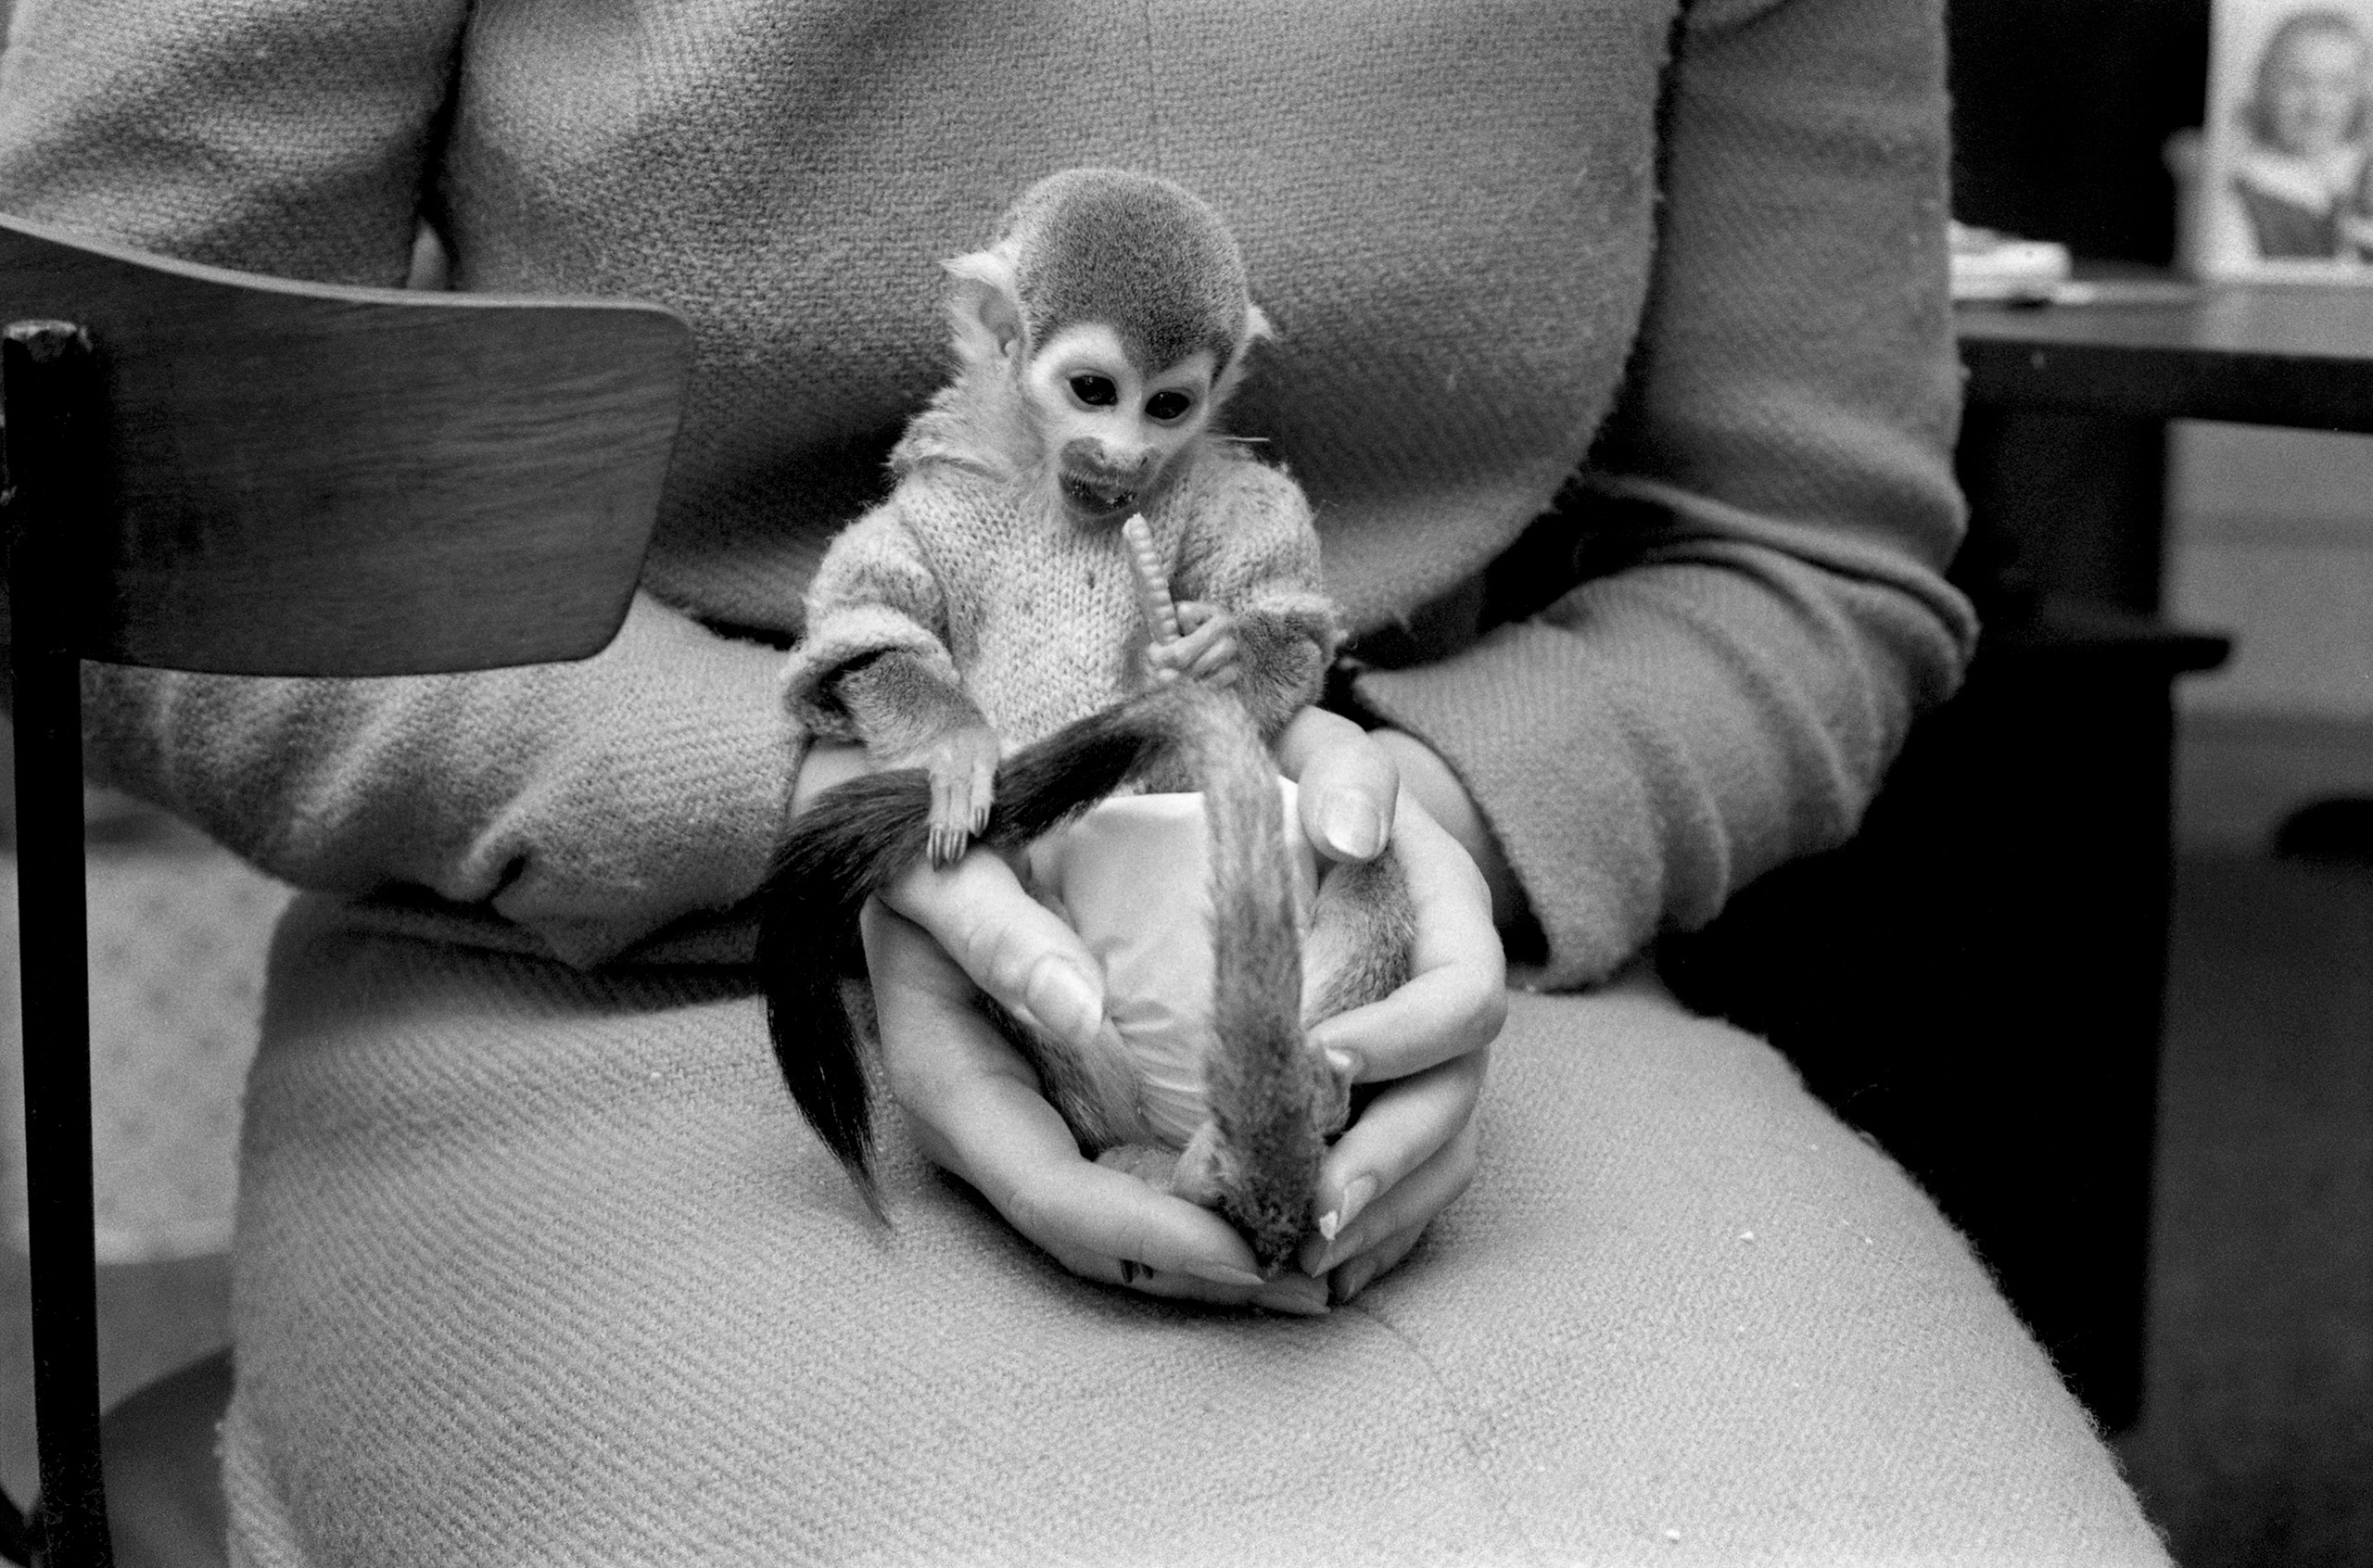 Lizou, a young squirrel monkey at the Boston chapter of the Simian Society of America, 1968. Published in  Monkey Business,  LOOK 32: 16 (Aug. 6, 1968).